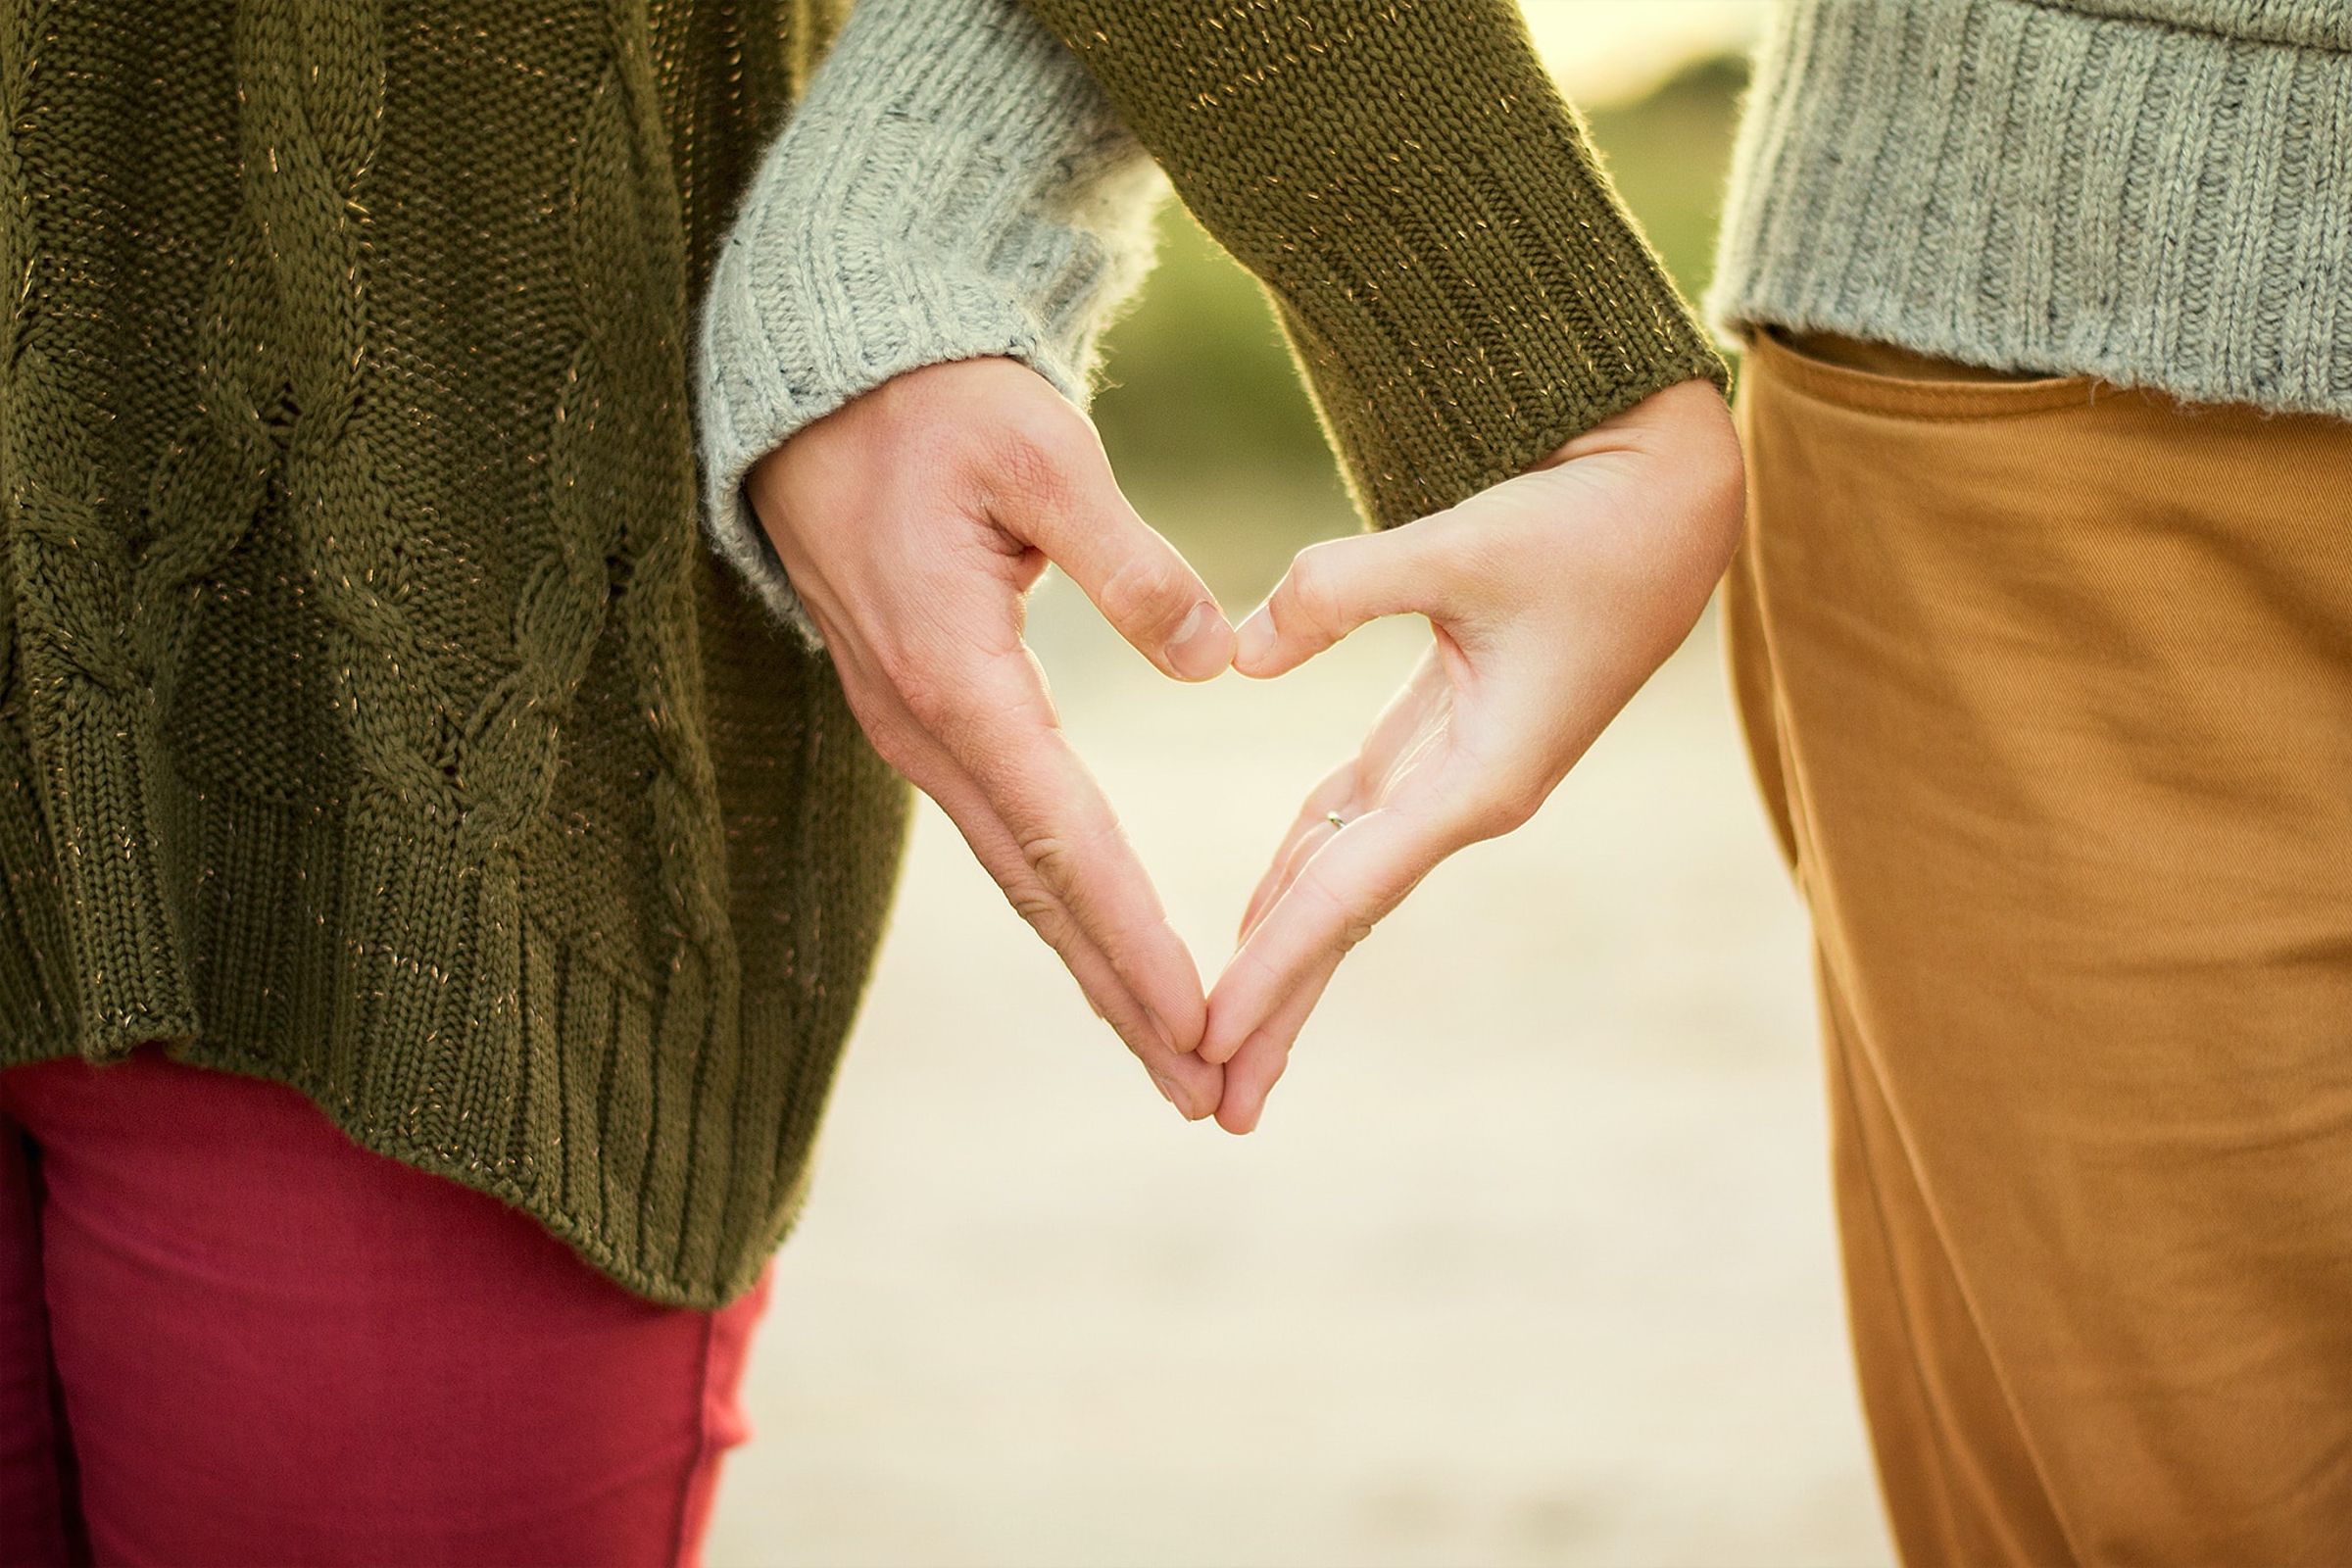 Two individuals putting their hands together to make a heart. | Source: Unsplash